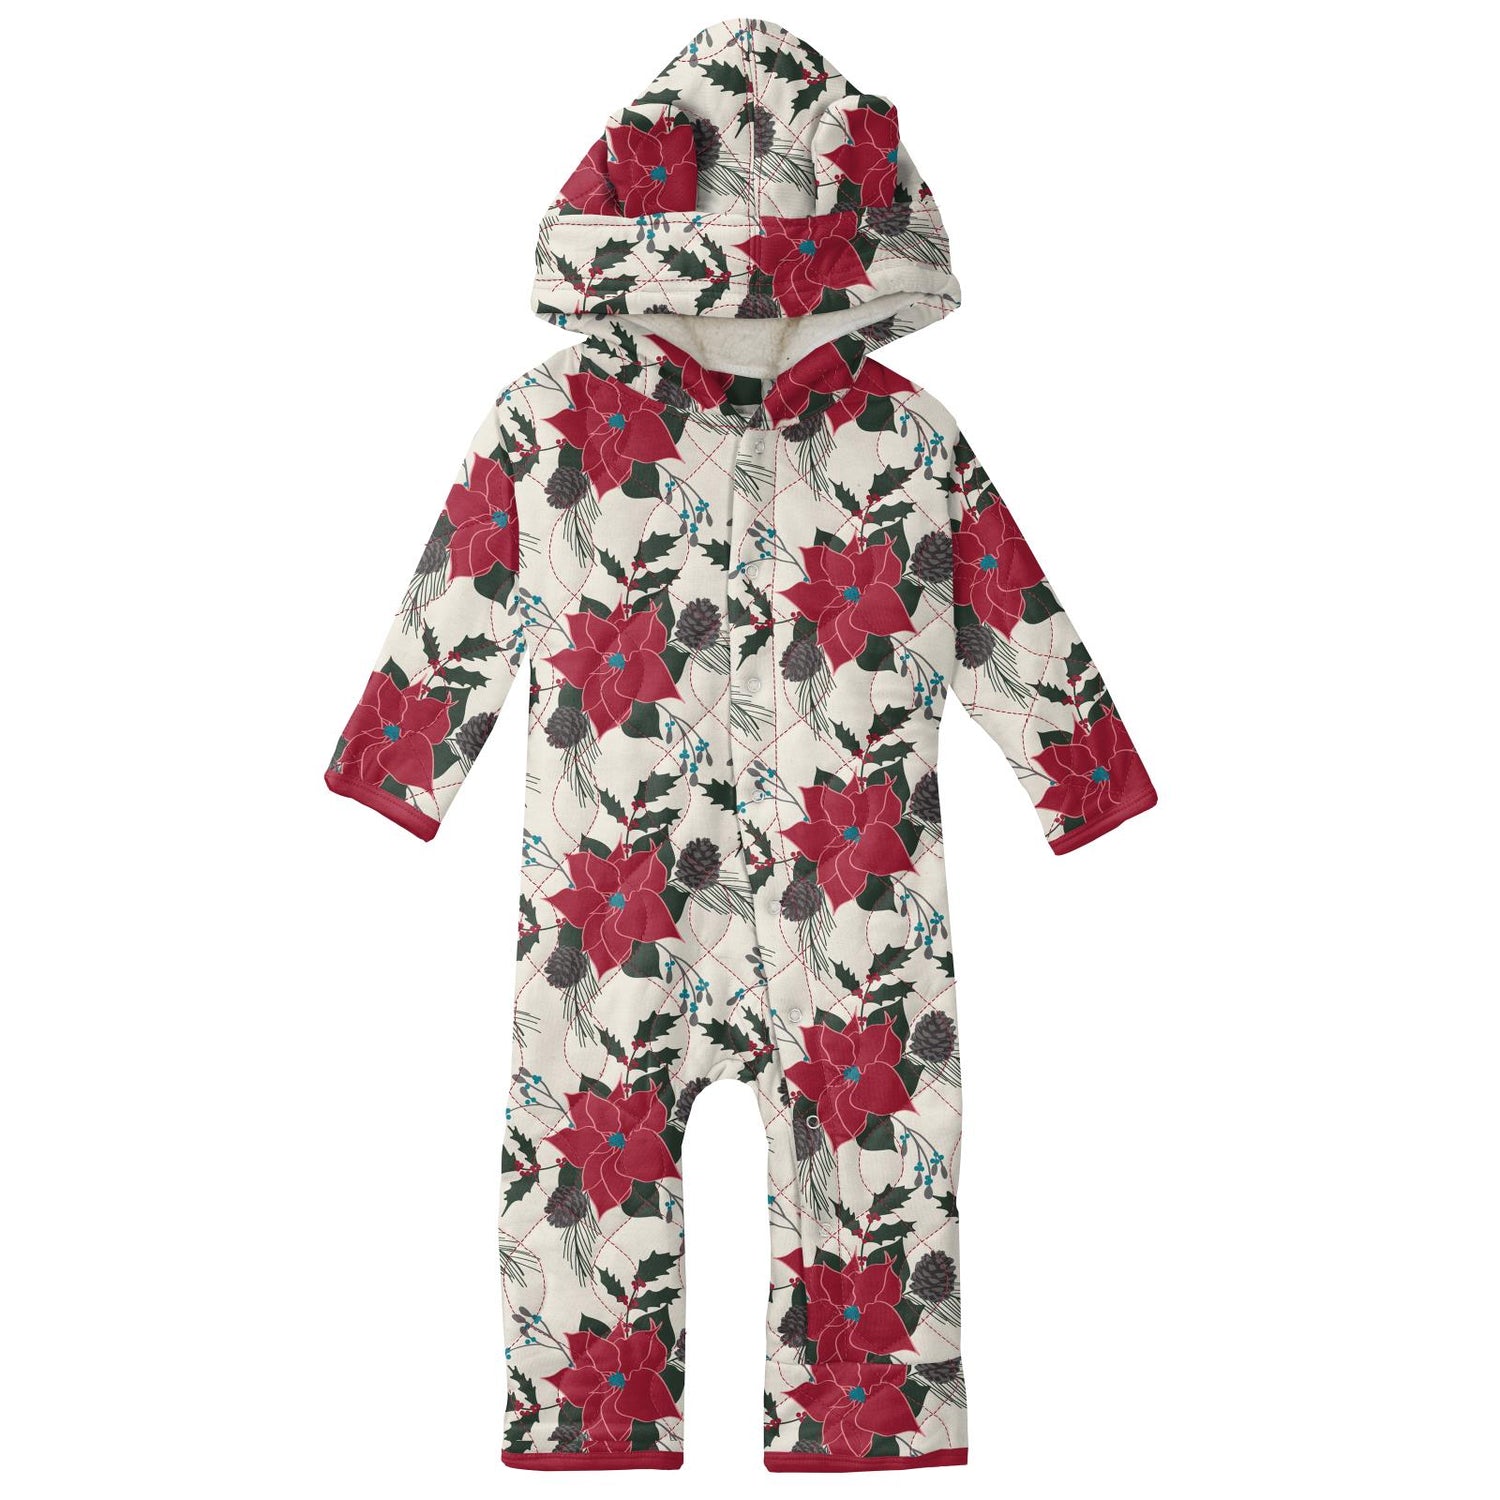 Print Quilted Hoodie Coverall with Sherpa-Lined Hood in Christmas Floral/Strawberry Candy Cane Stripe